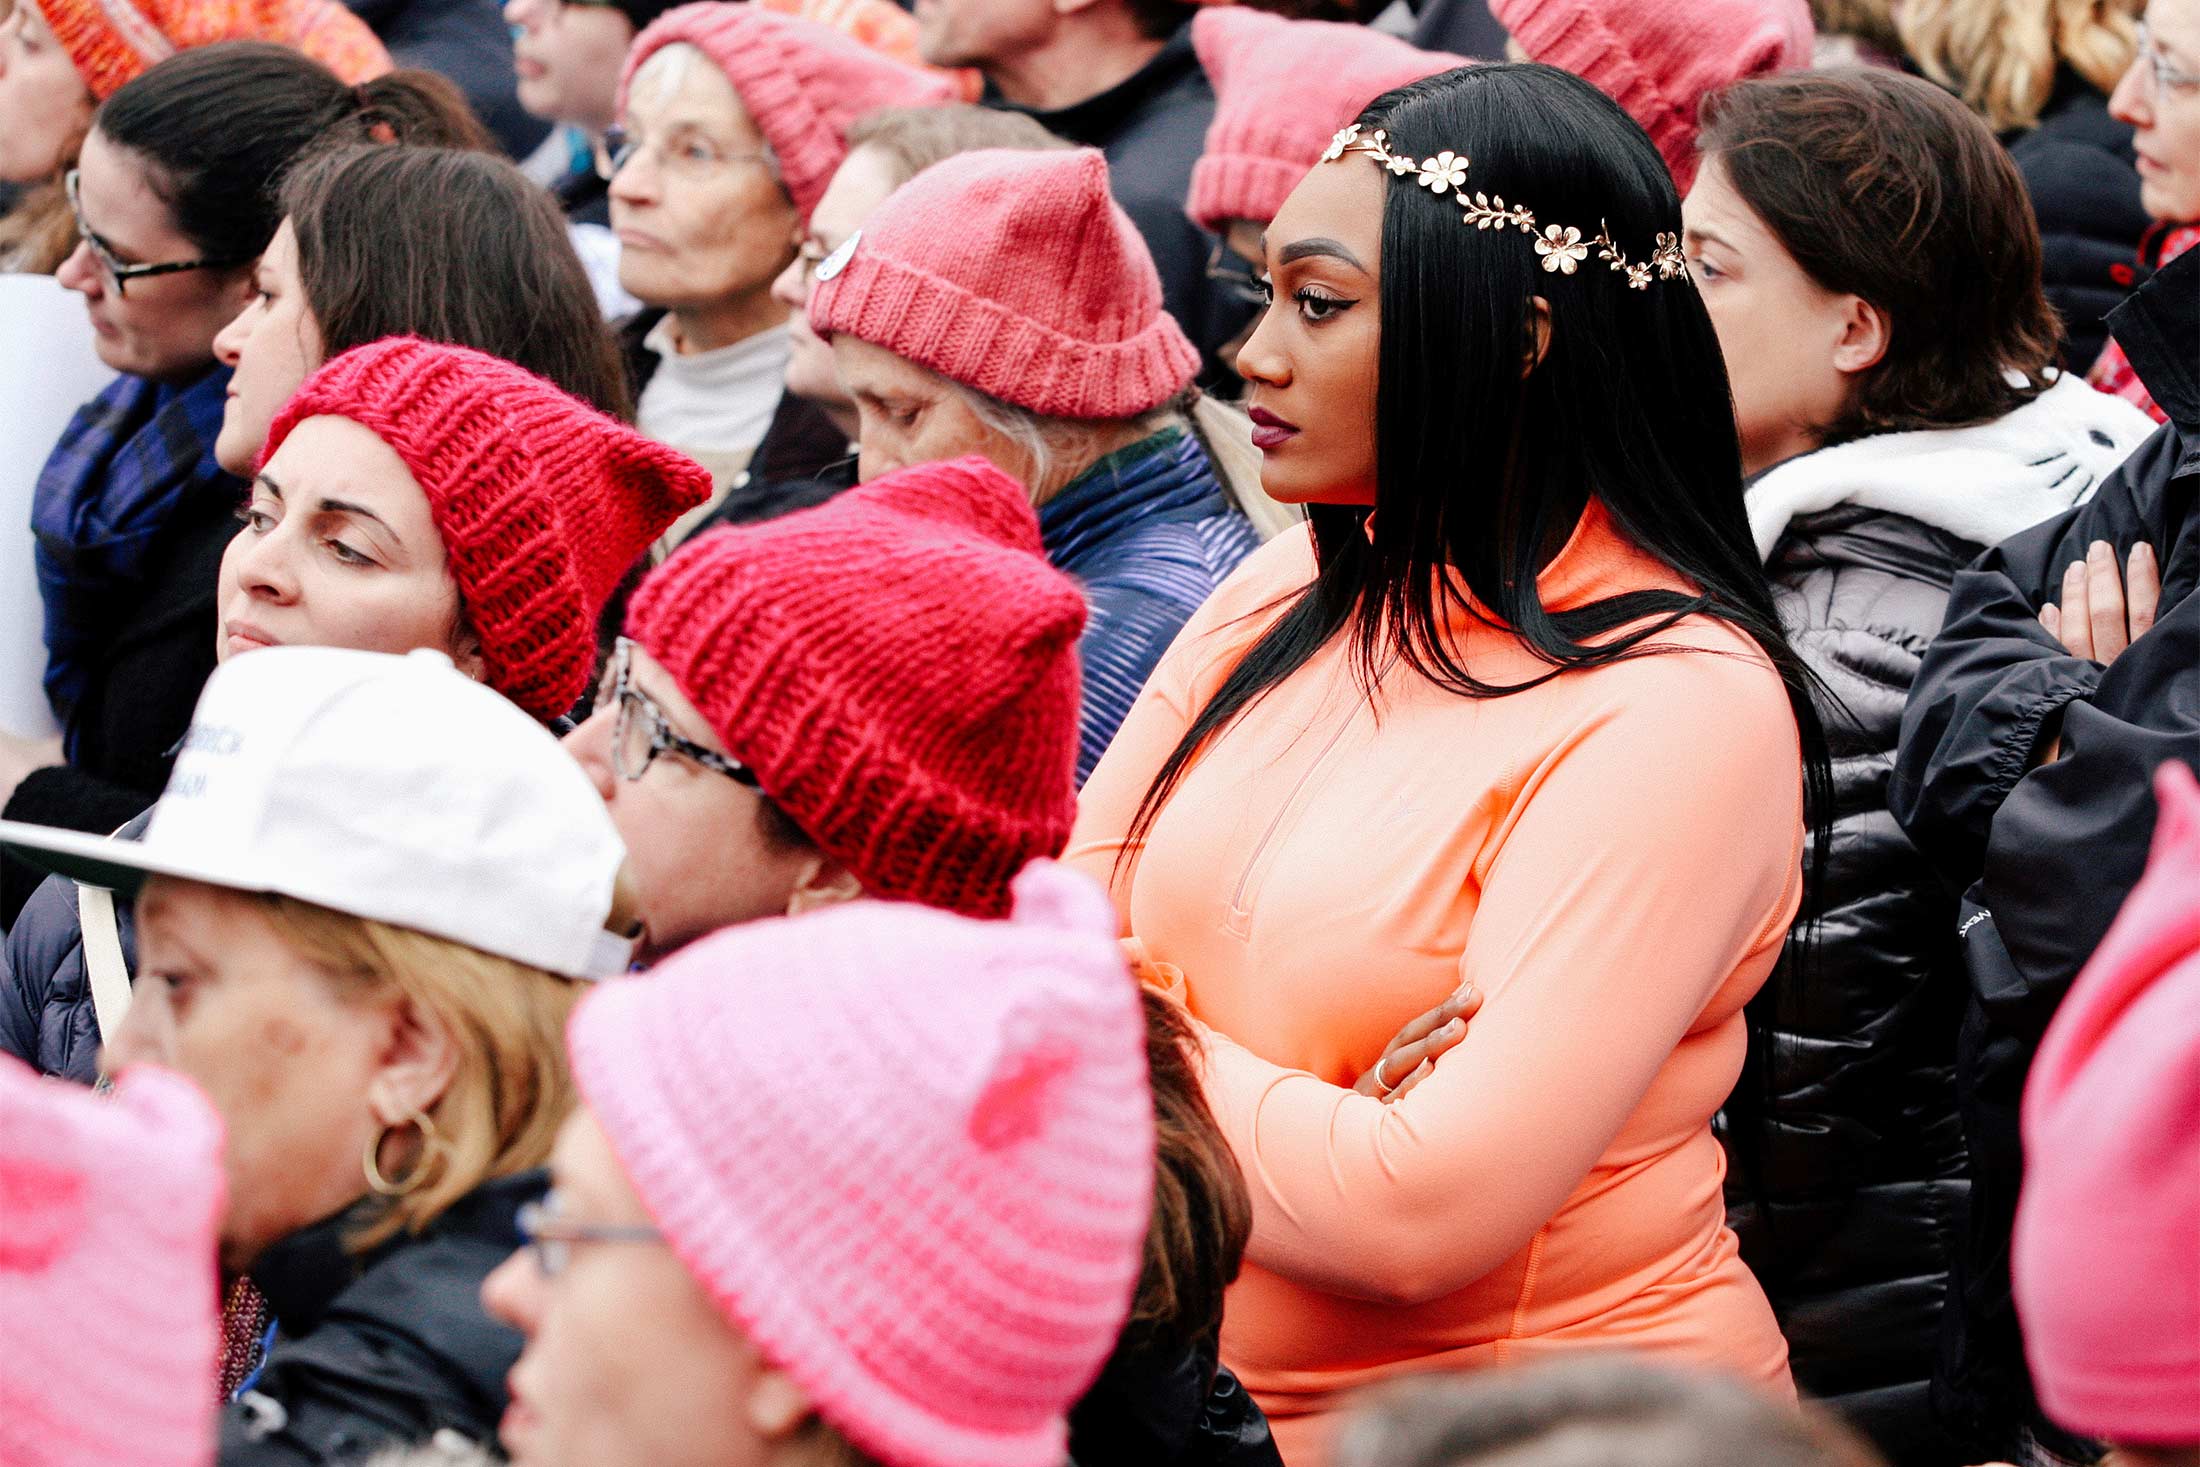 People wearing "pussy hats" and flower crowns listen to speeches at the 2017 Women's March in Washington.